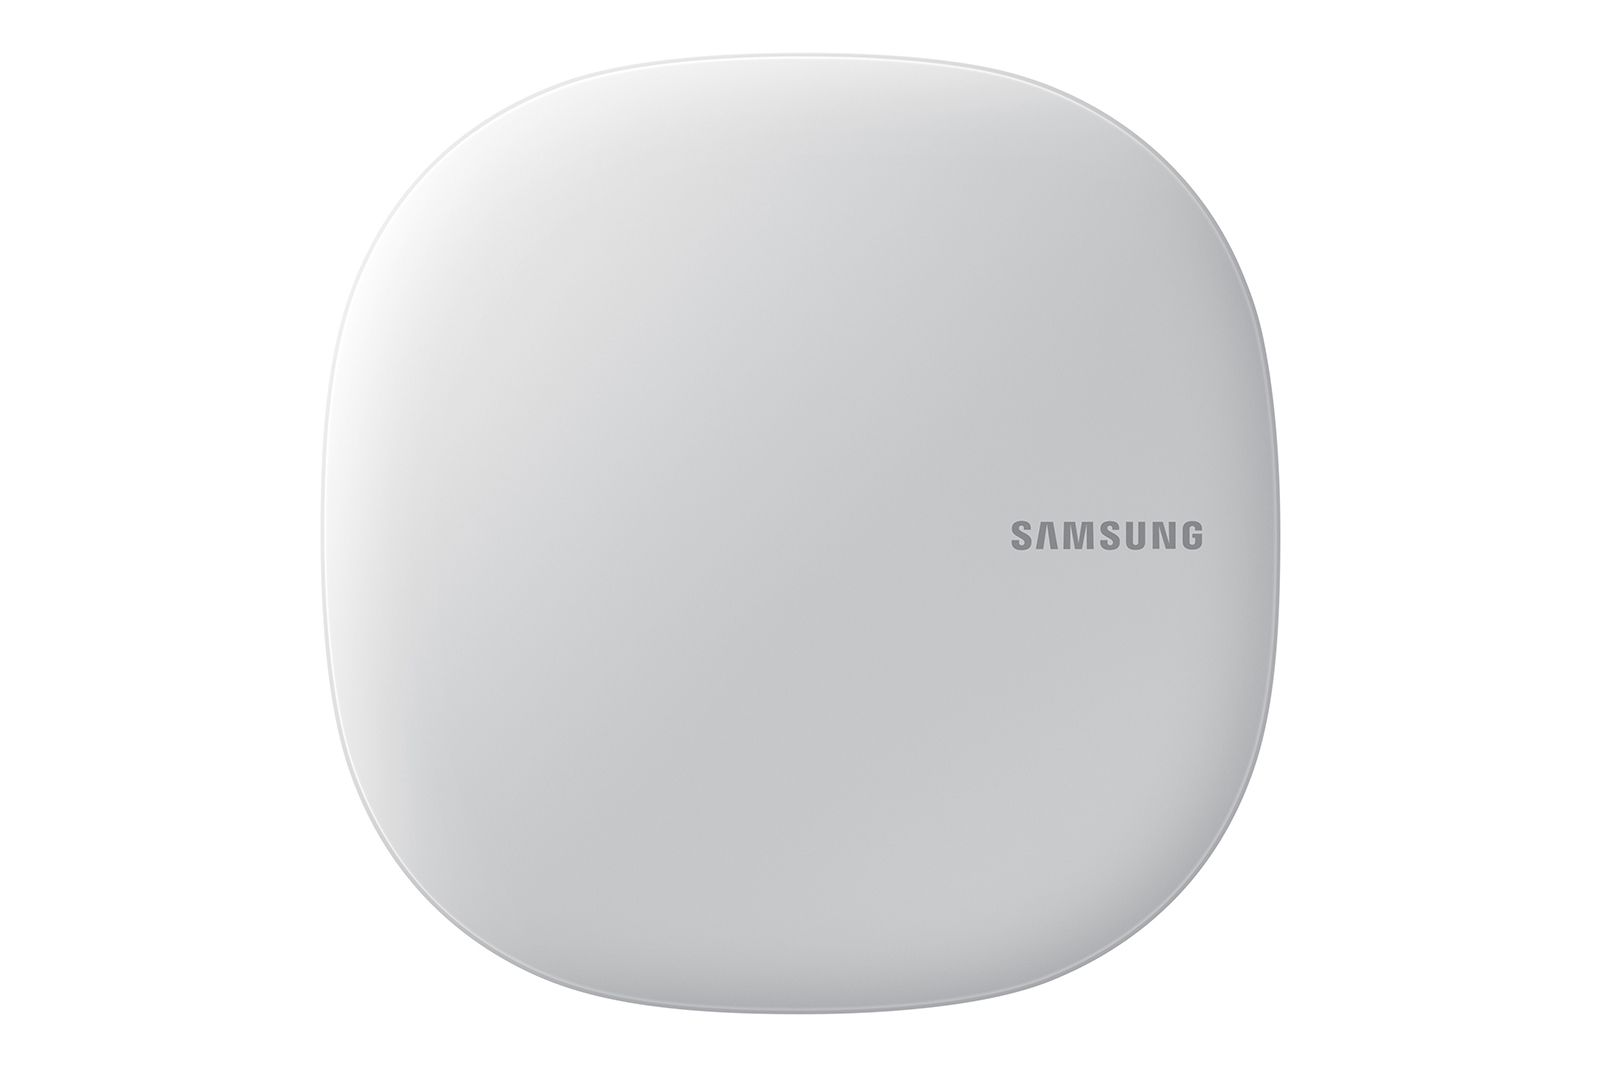 samsung connect home wi fi takes on google wifi with smart home skills to boot image 1